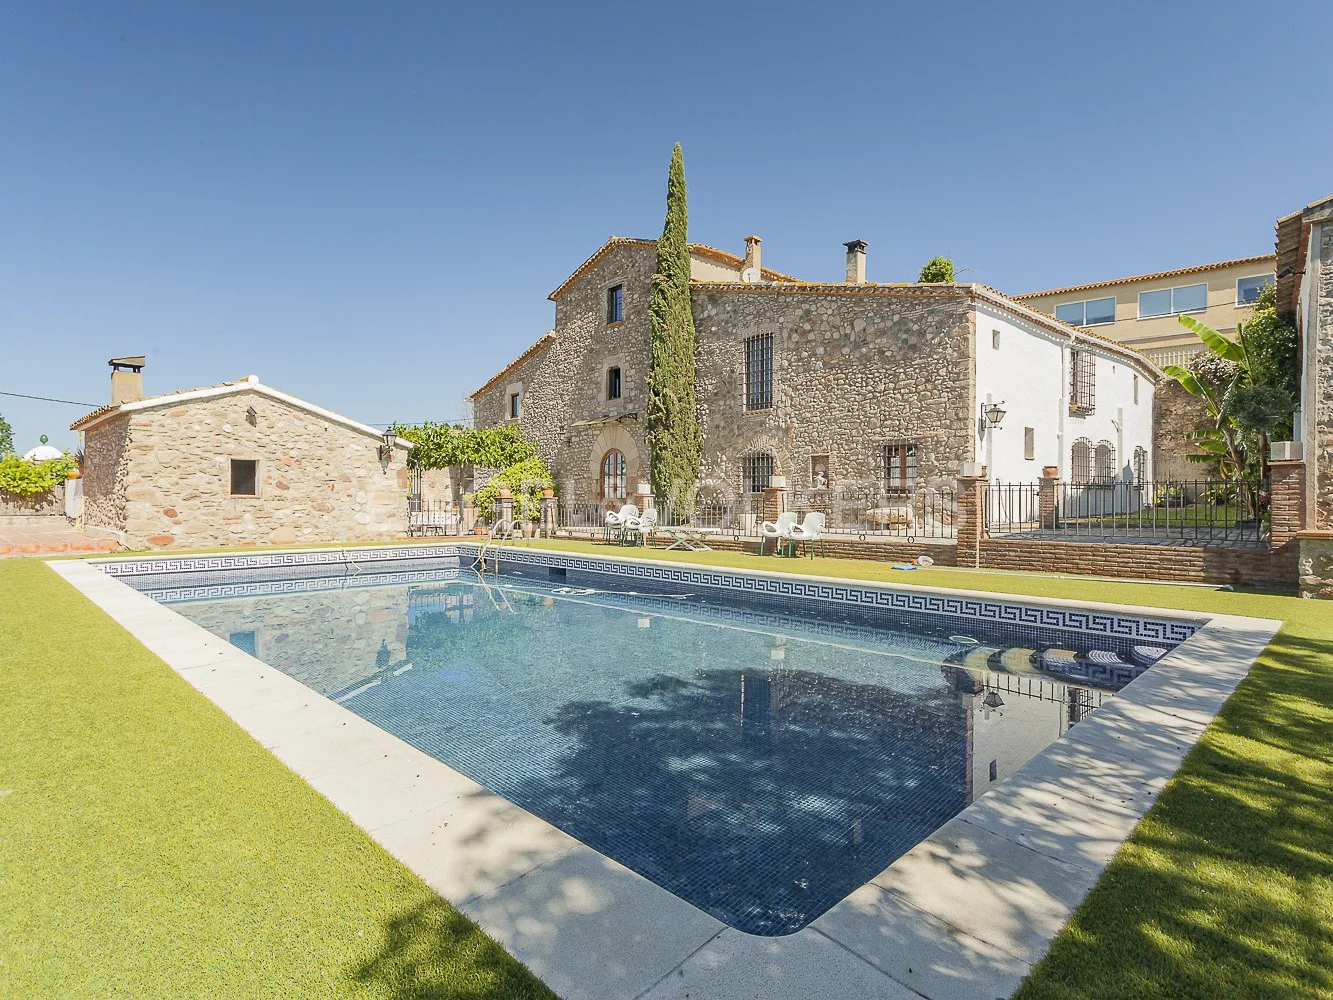 Spectacular farmhouse with license for horse riding, restaurant and rural house.